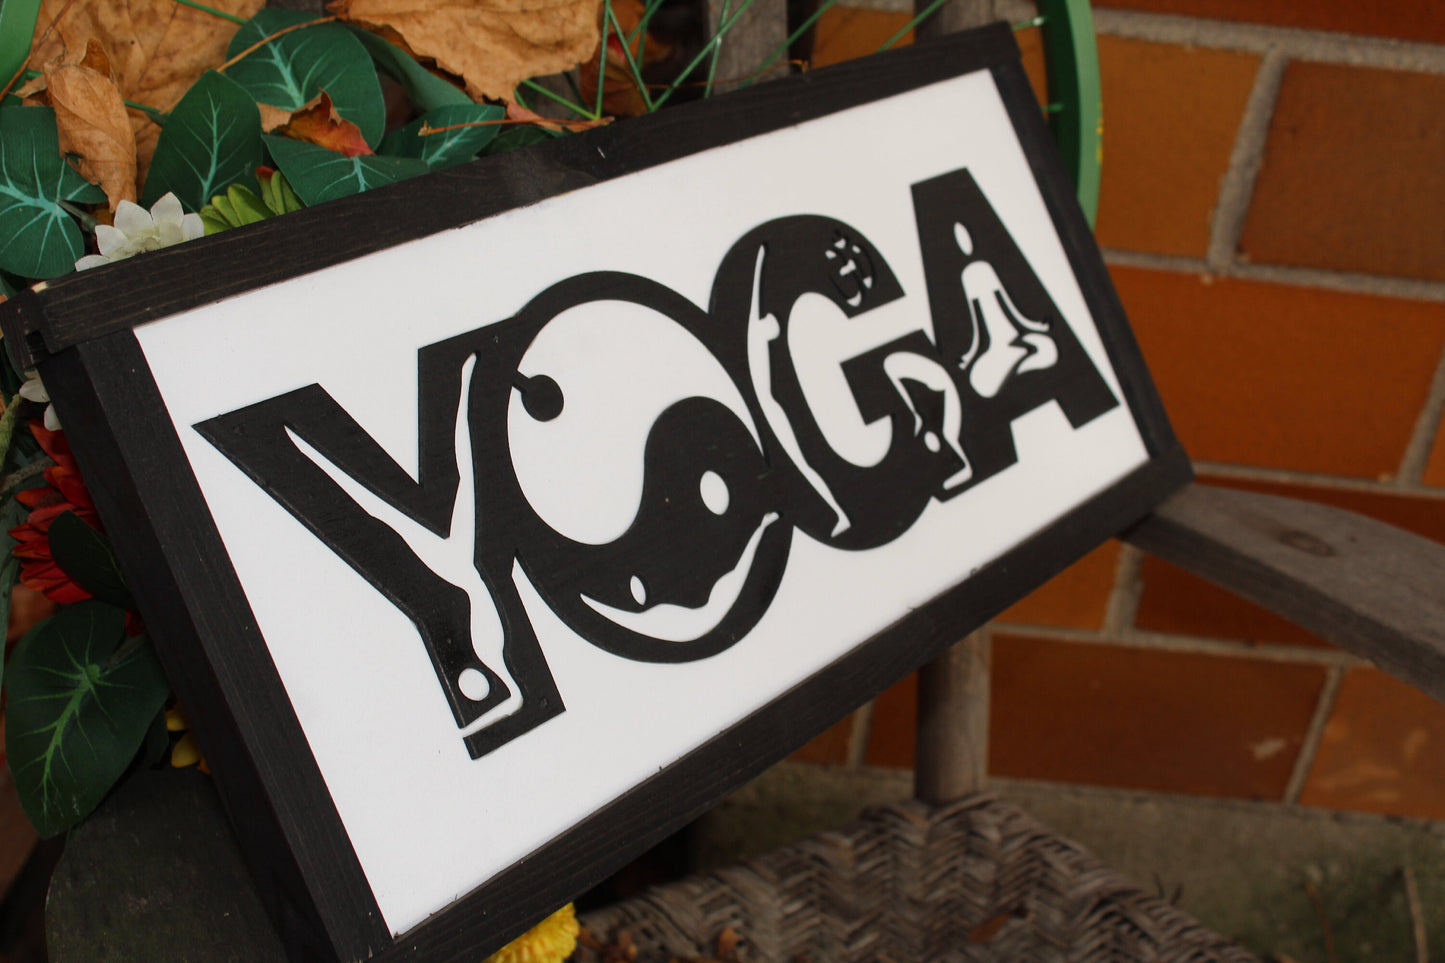 Yoga Wood Sign 3D Raised Text Ebony White Sign Relax Zen Relax Spa Psycially Fit Trainer Handmade FootstepsInThePast Gym Decor